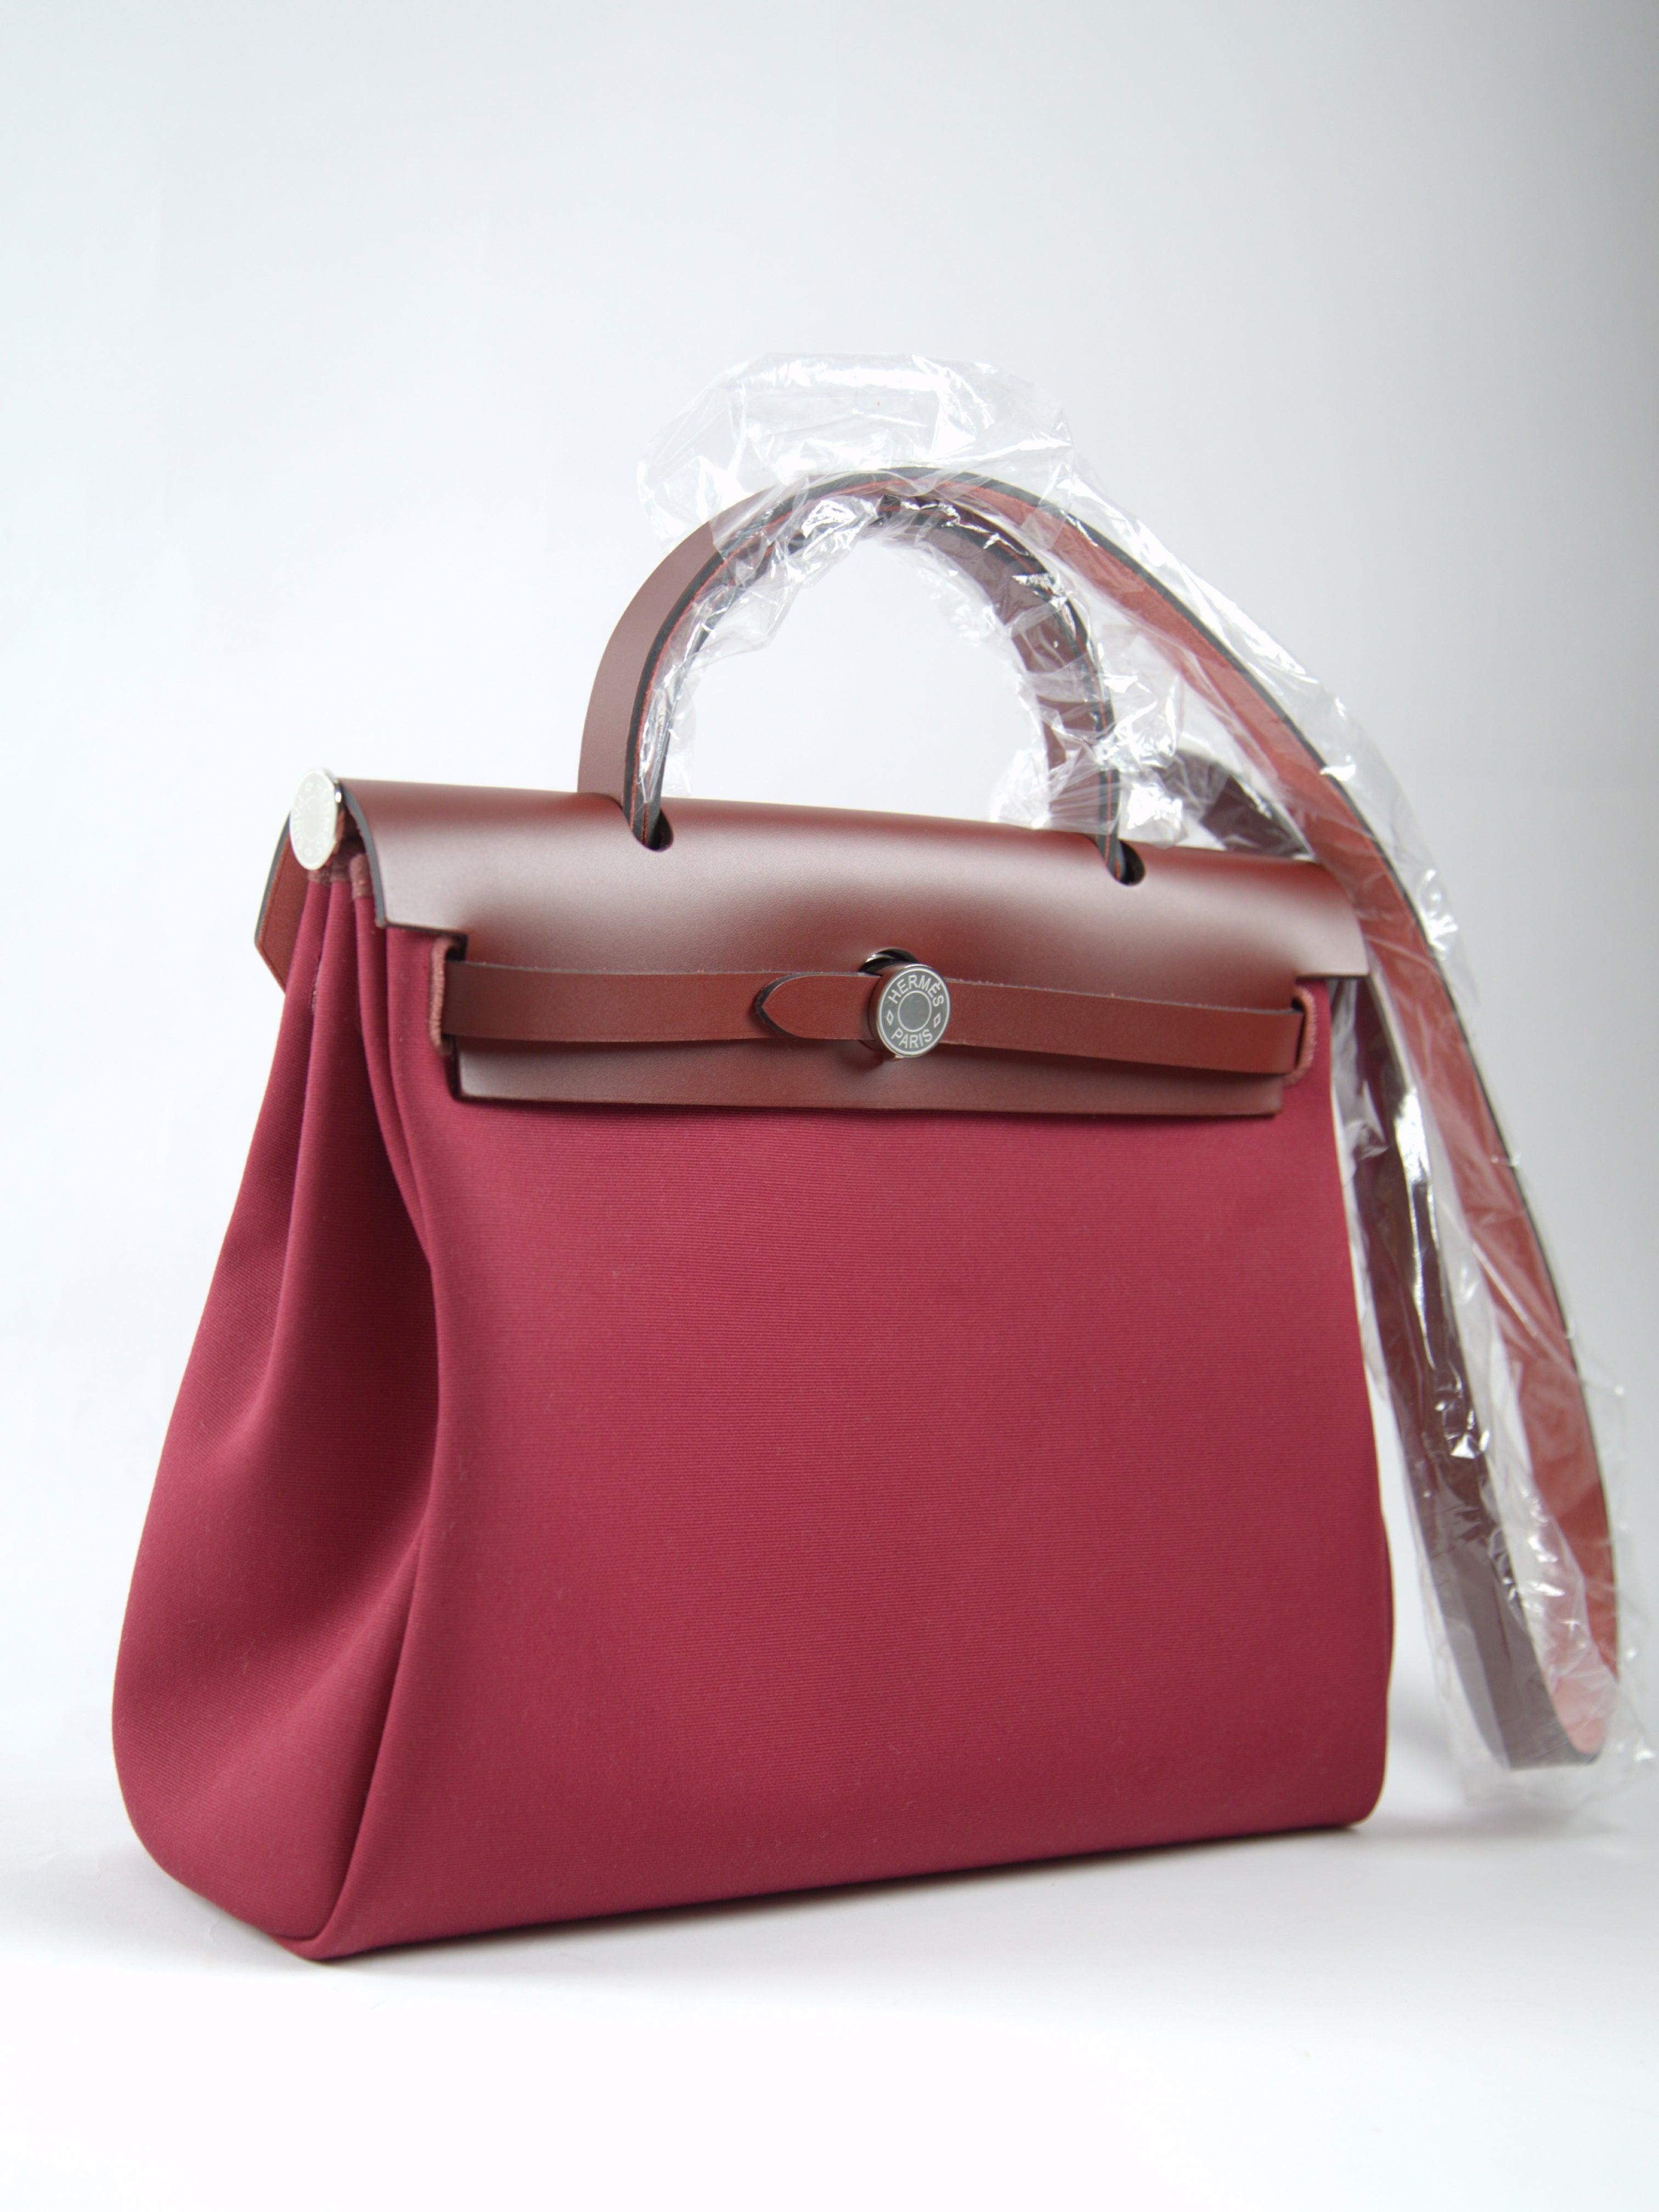 Hermès Herbag 31cm in Rubis, Rose, Bubblegum and Rouge H

Canvas & Vache Hunter Leather with Palladium Hardware

B Stamp / 2023

Accompanied by: Original receipt, Hermes box, dustbag, clochette, lock, two keys, clochette dustbag, zip pouch and